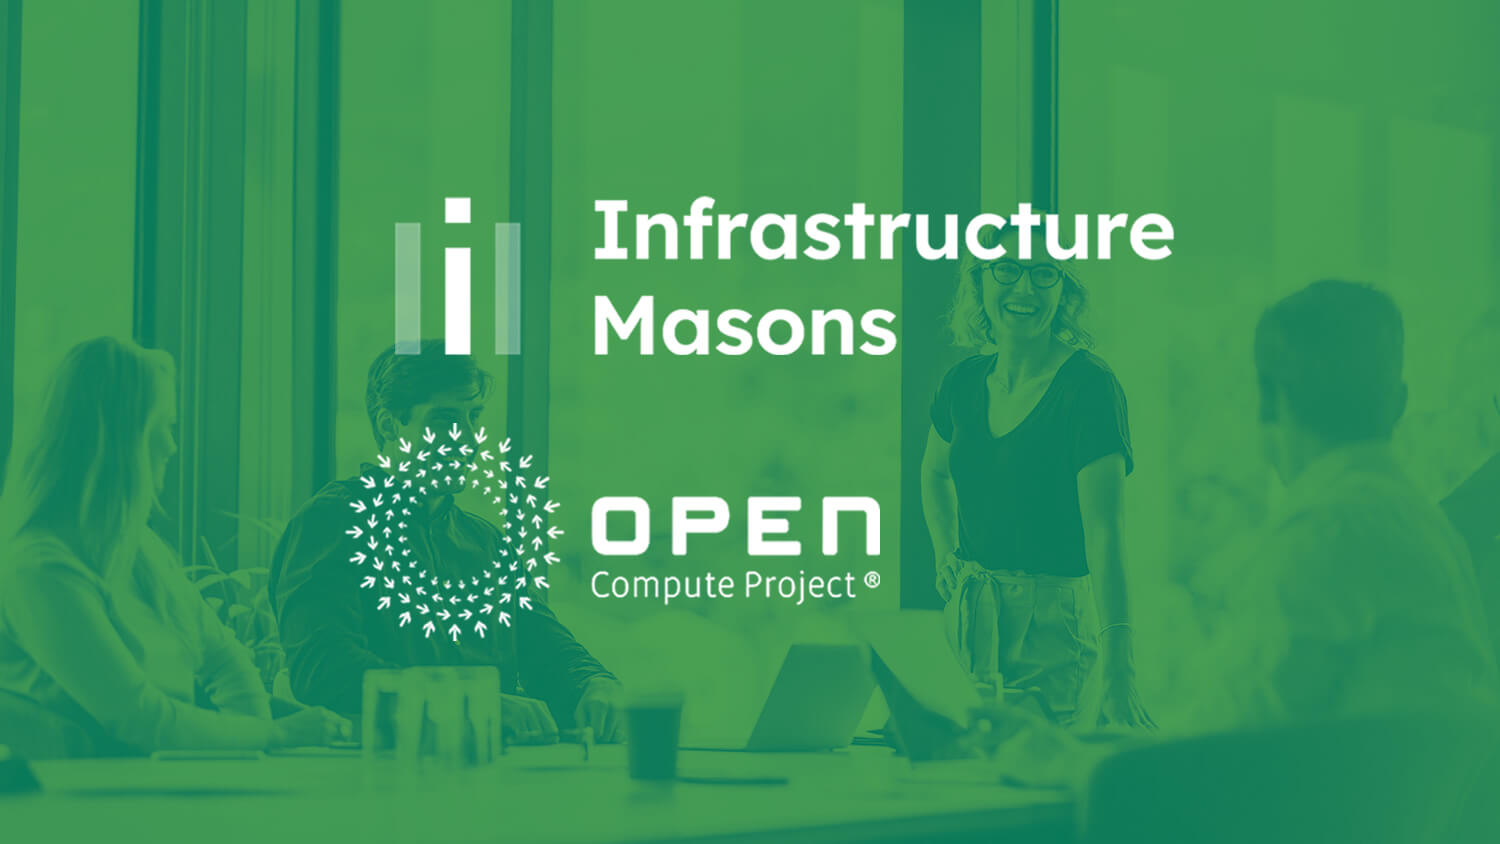 Open Compute Project Foundation and iMasons Announce a New Collaboration